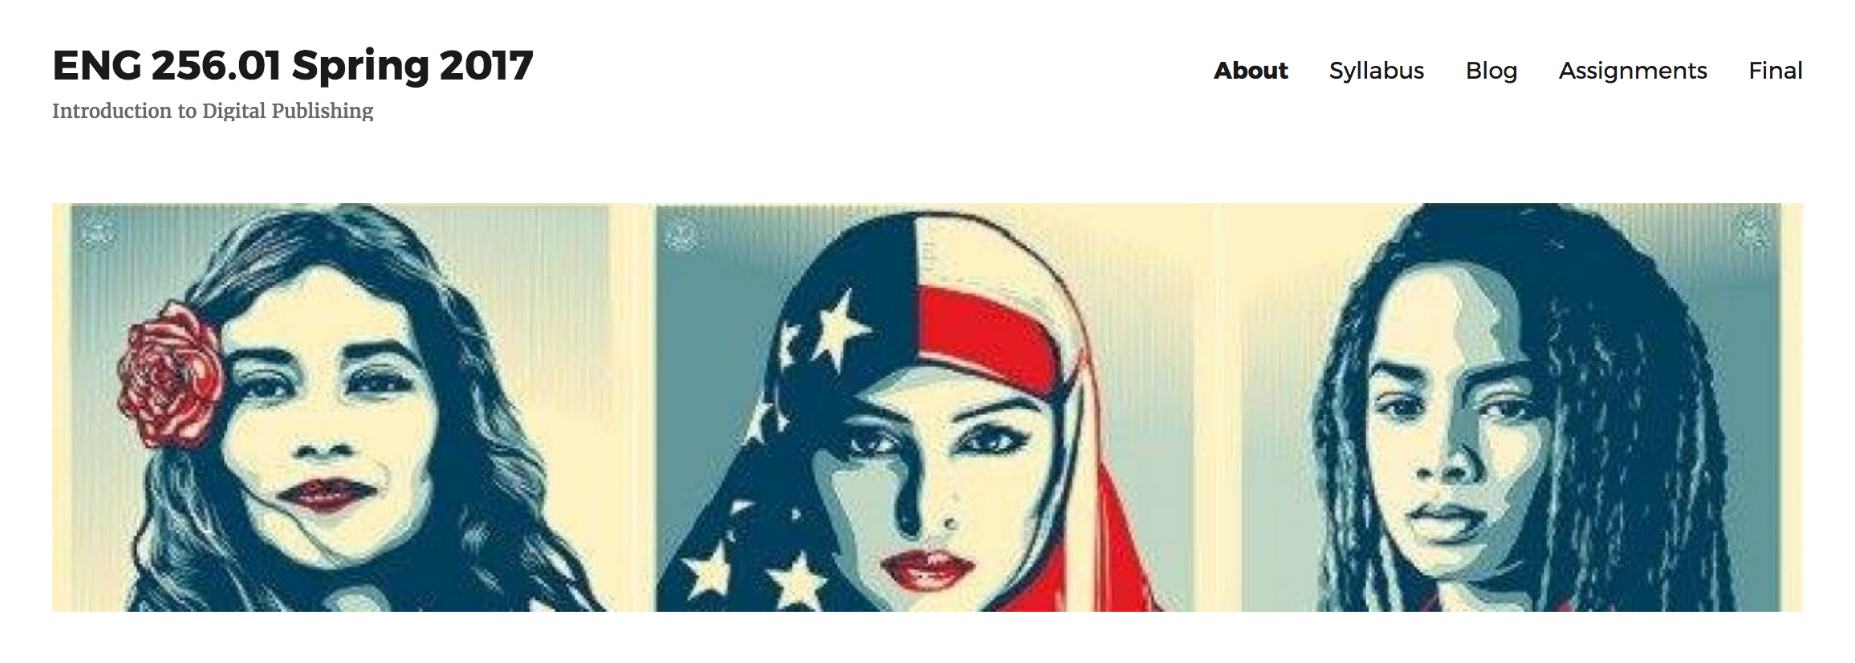 Screen shot of website front page for ENG 256.01 Spring 2017: Introduction to Digital Publishing. Features stylized images of three women — one with a bright, bold flower in her hair; one wearing a hijab styled from the American flag, and one with dreadlocks and downcast eyes